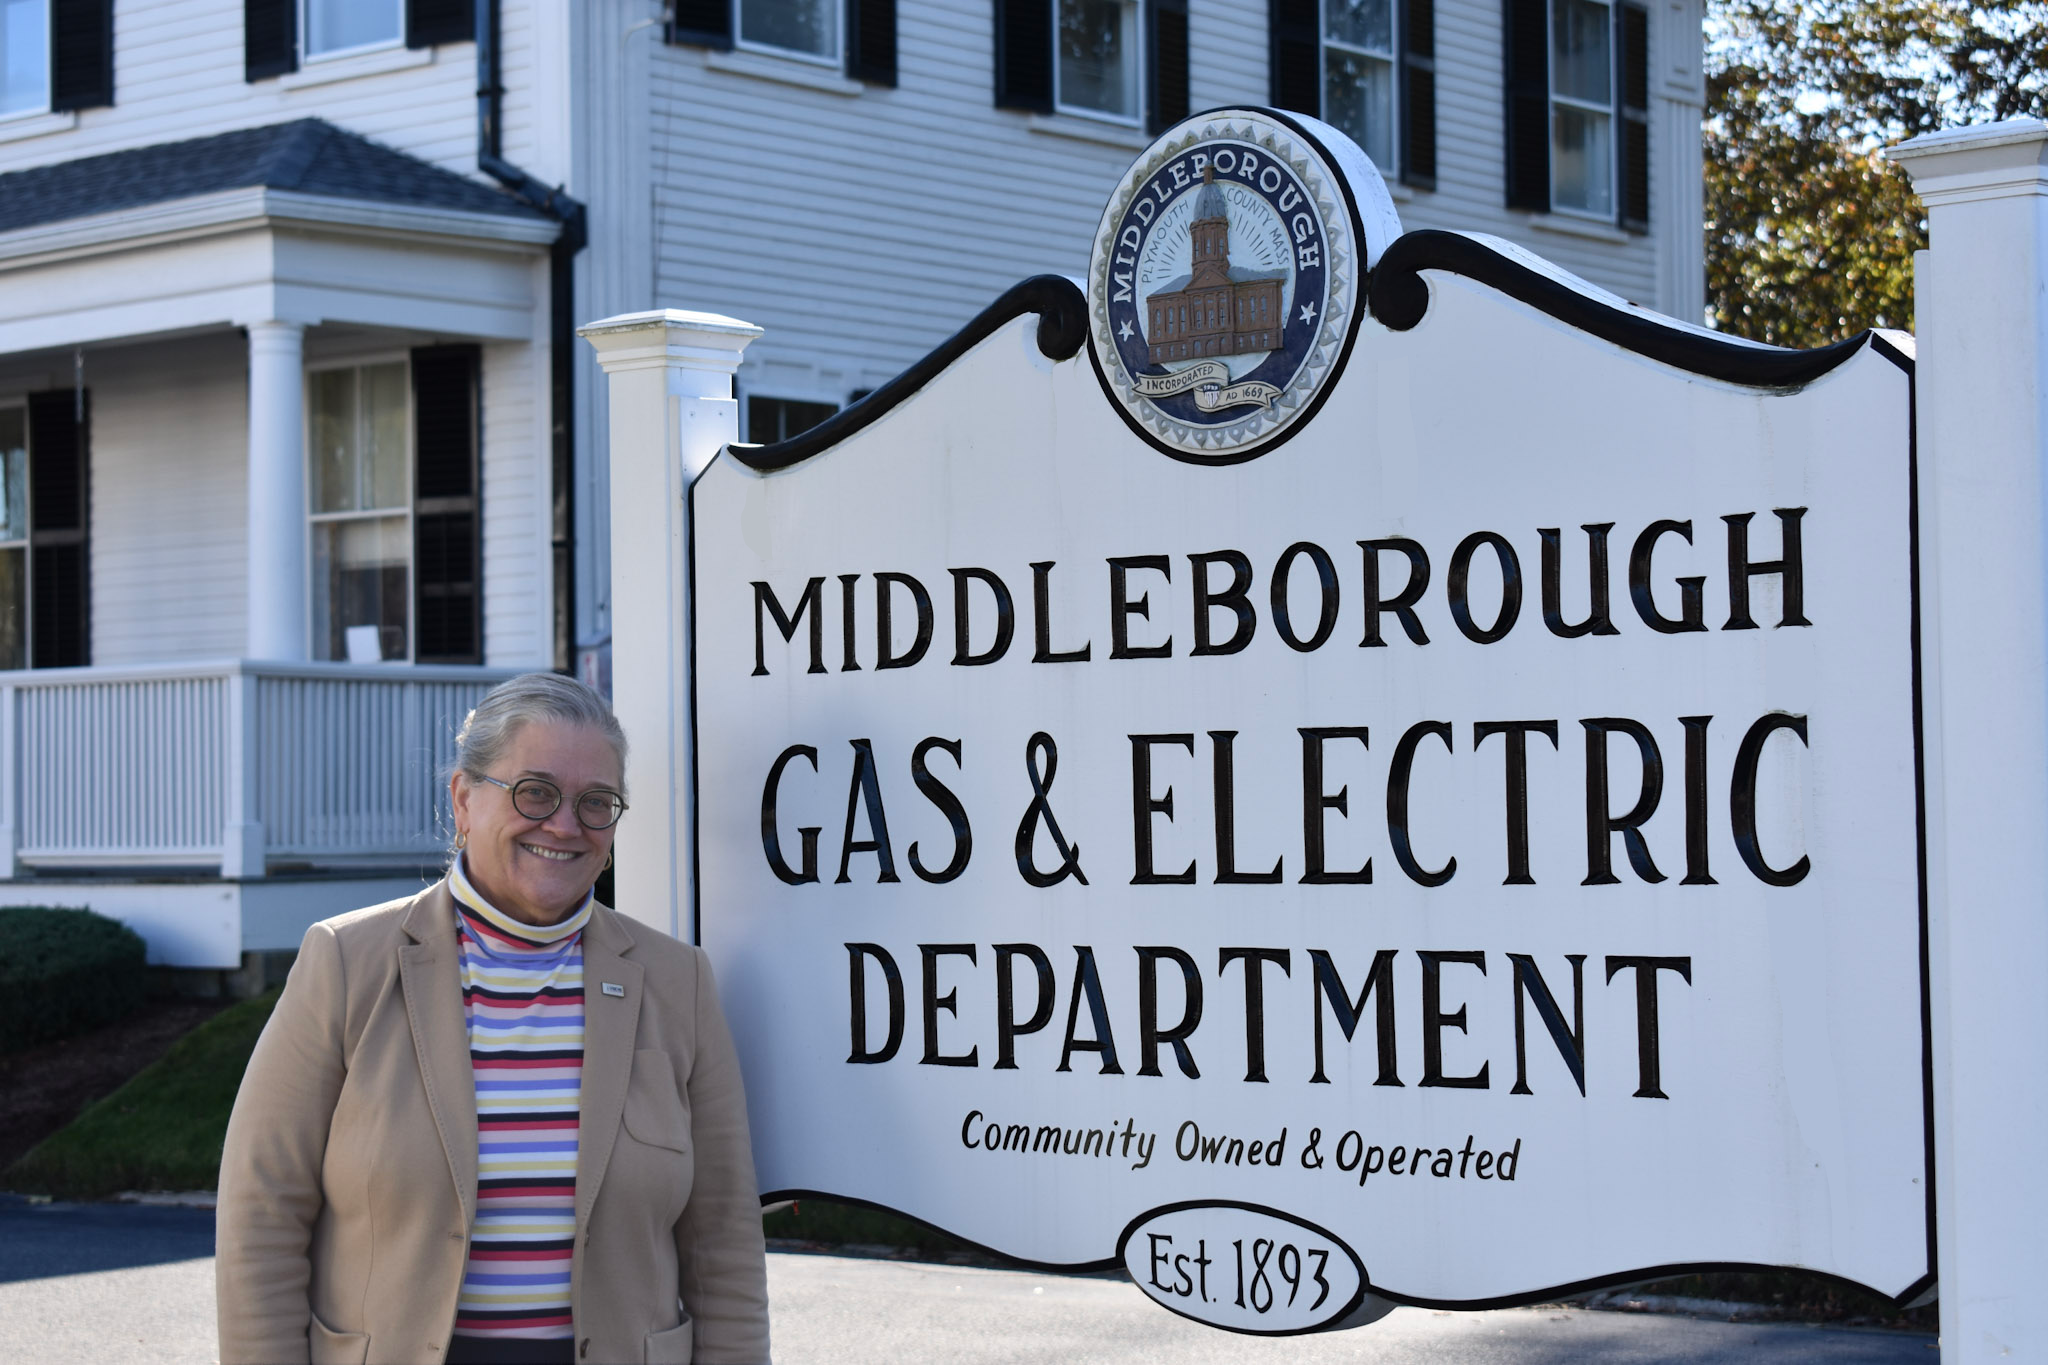 Jackie Crowley next to a sign for Middleborough Gas and Electric